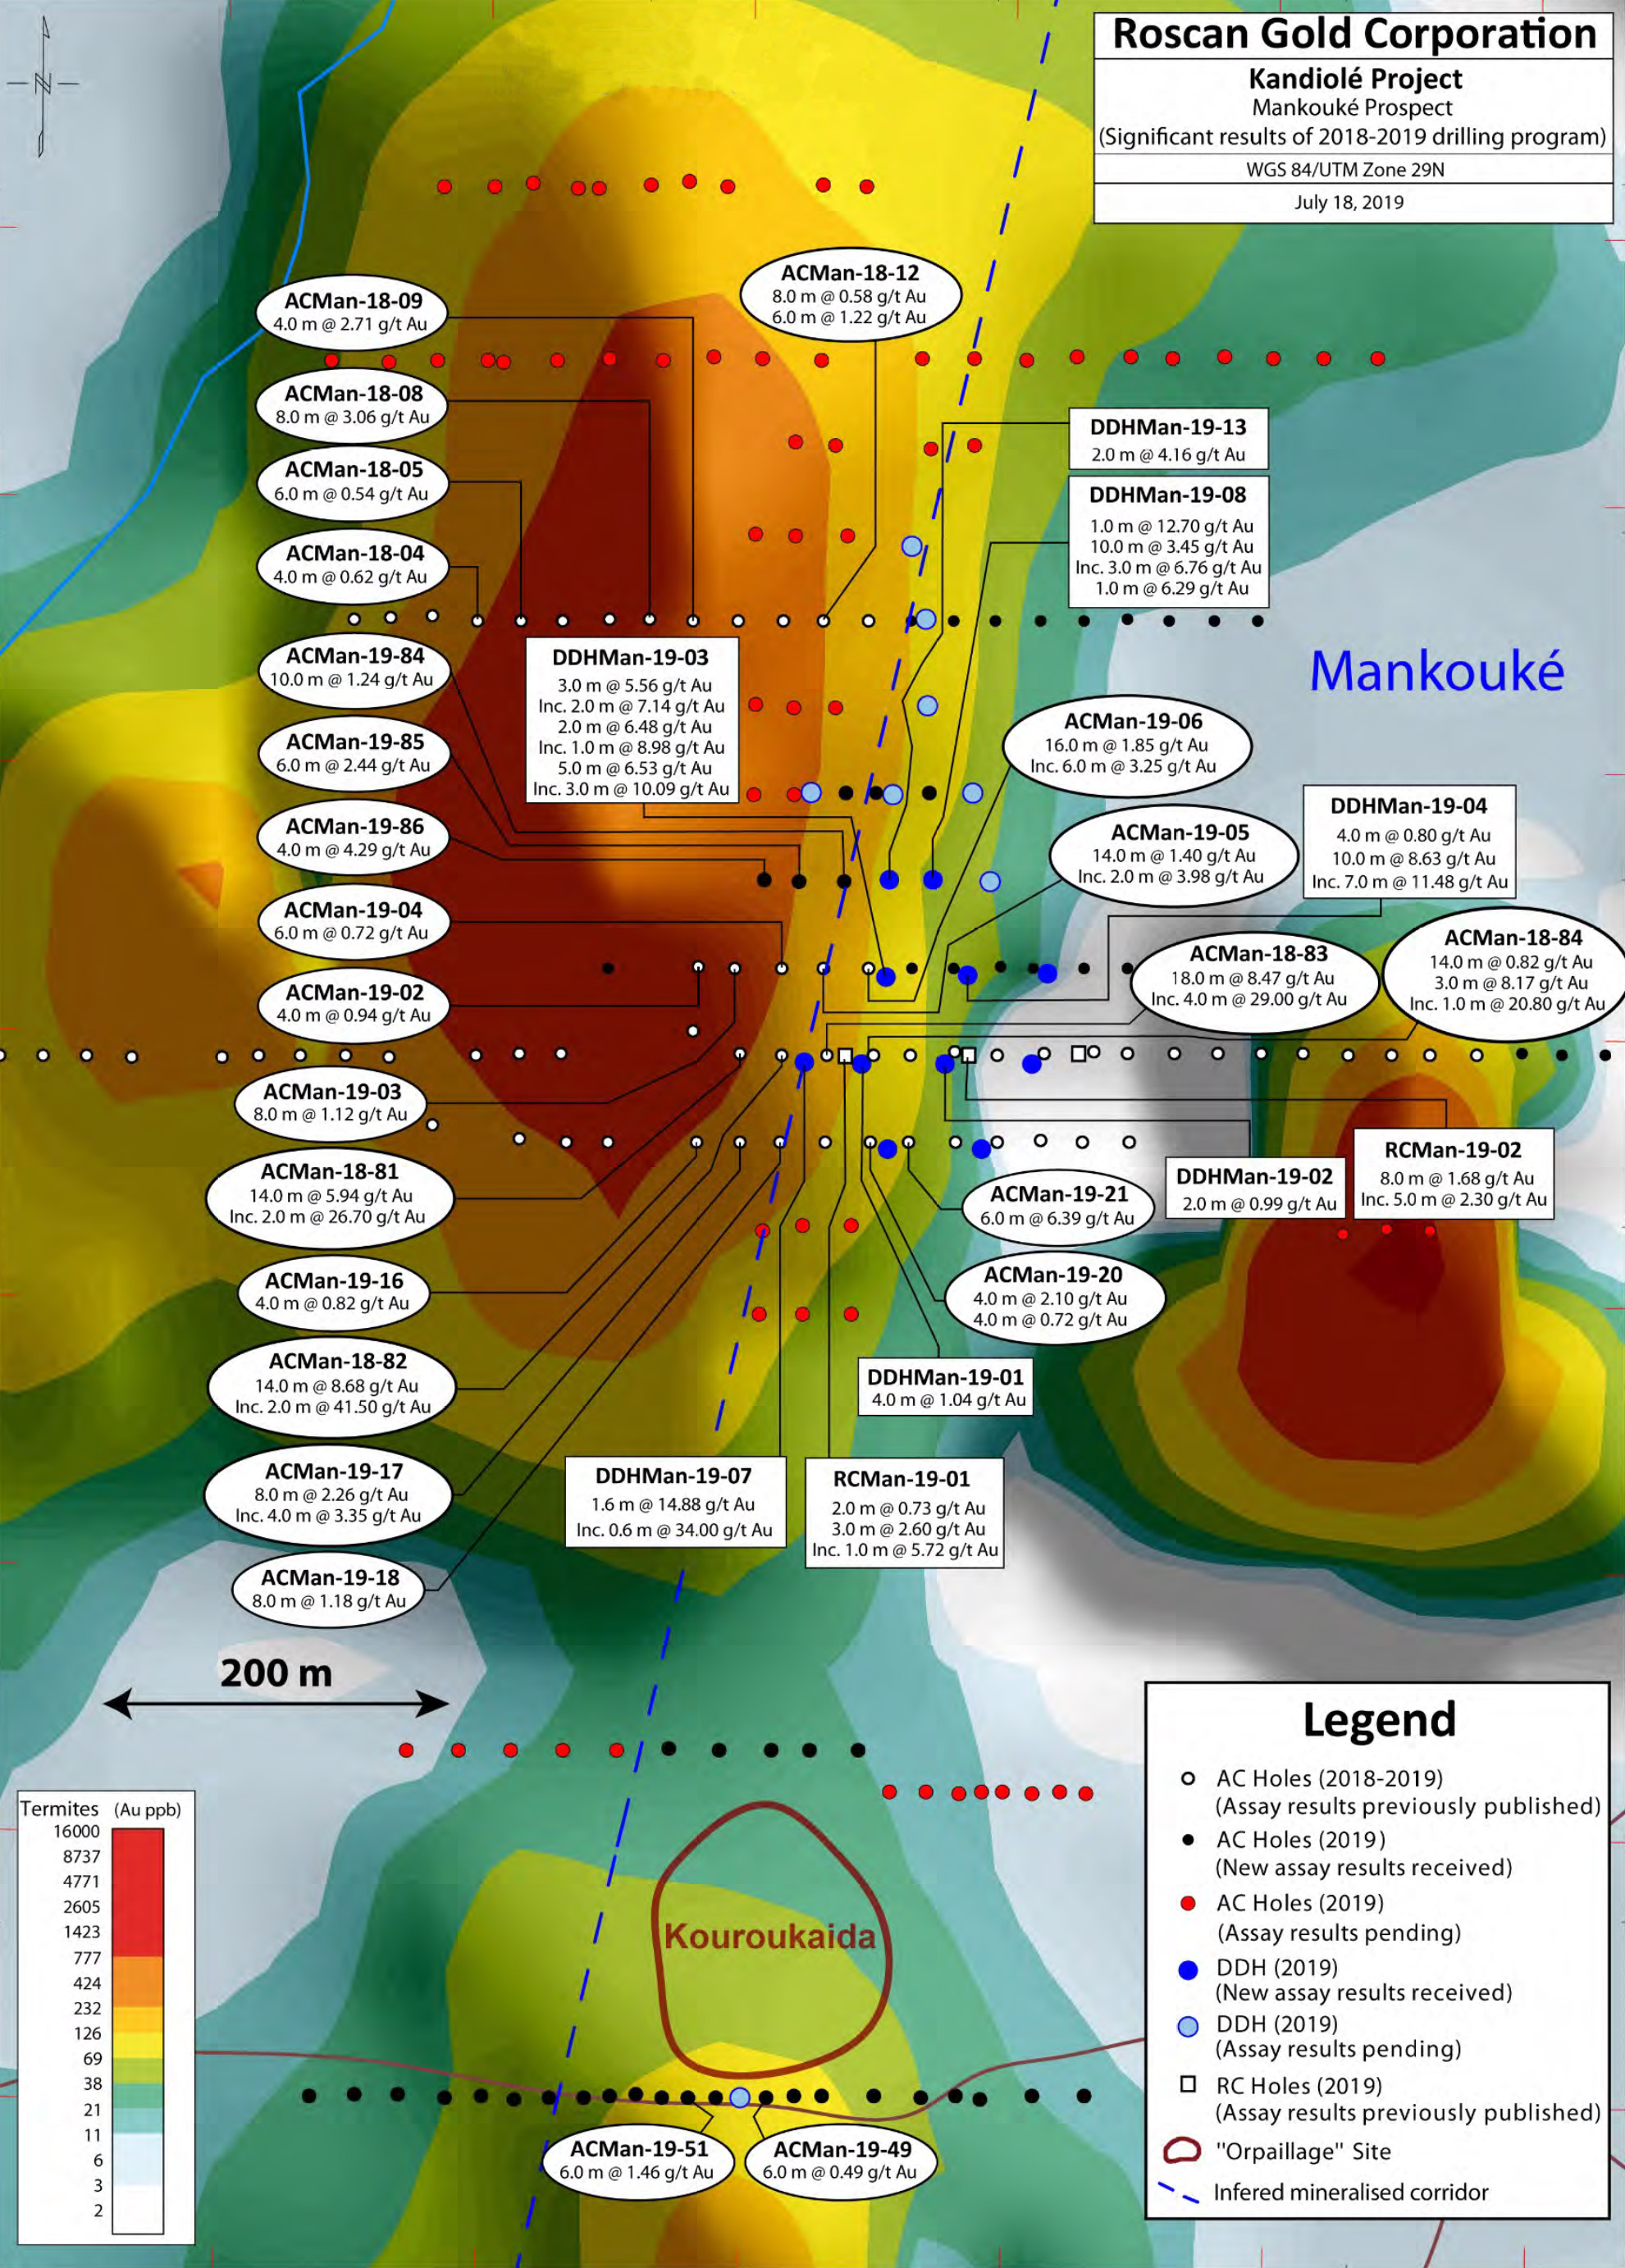 Mankouké Prospect - Significant results of 2018-2019 drilling campaign